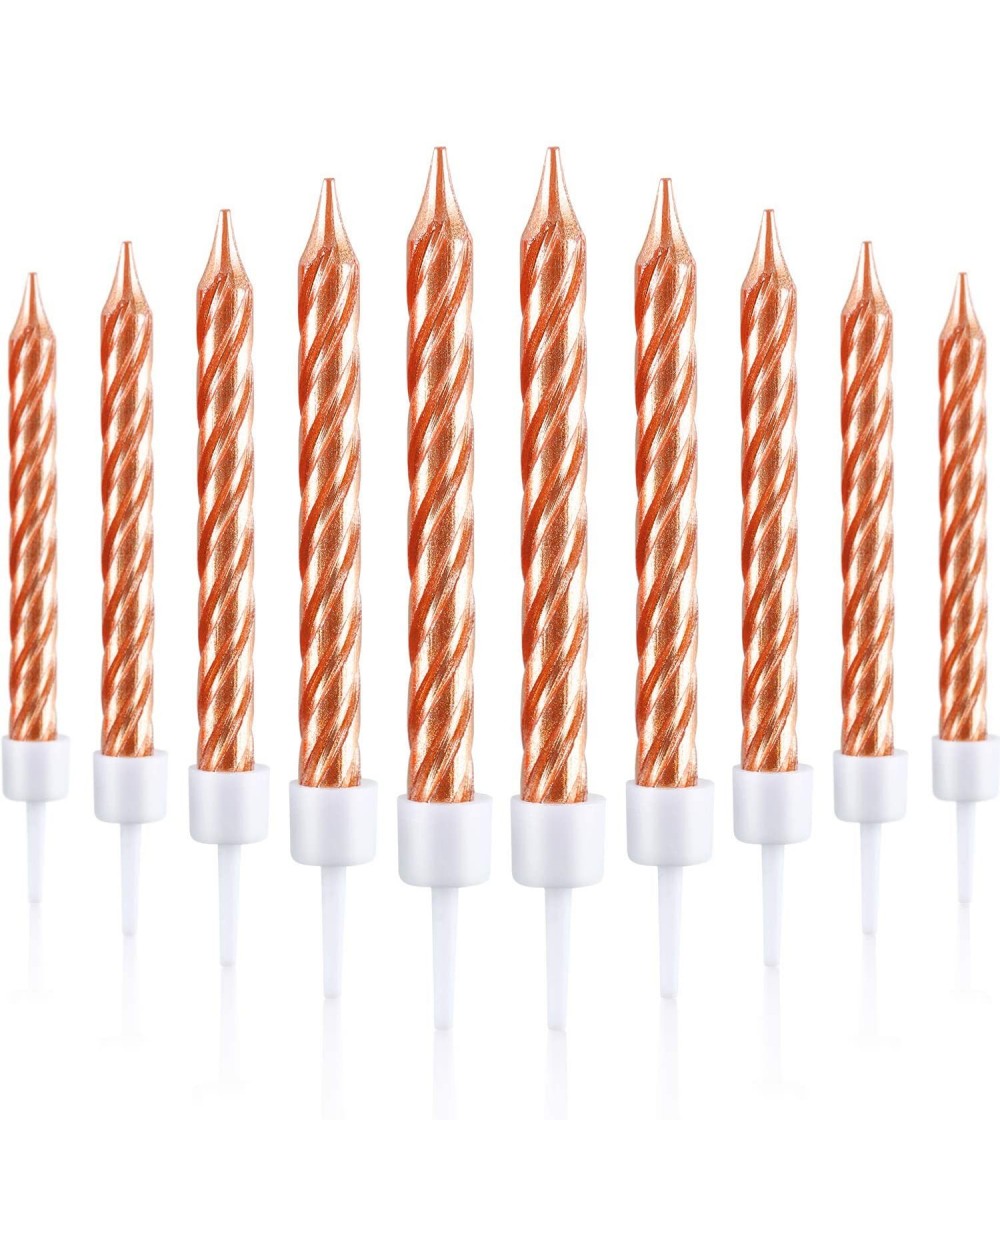 Birthday Candles 50 Pieces Spiral Cake Candles in Holders Metallic Cake Cupcake Candles Short Thin Cake Candles for Birthday ...